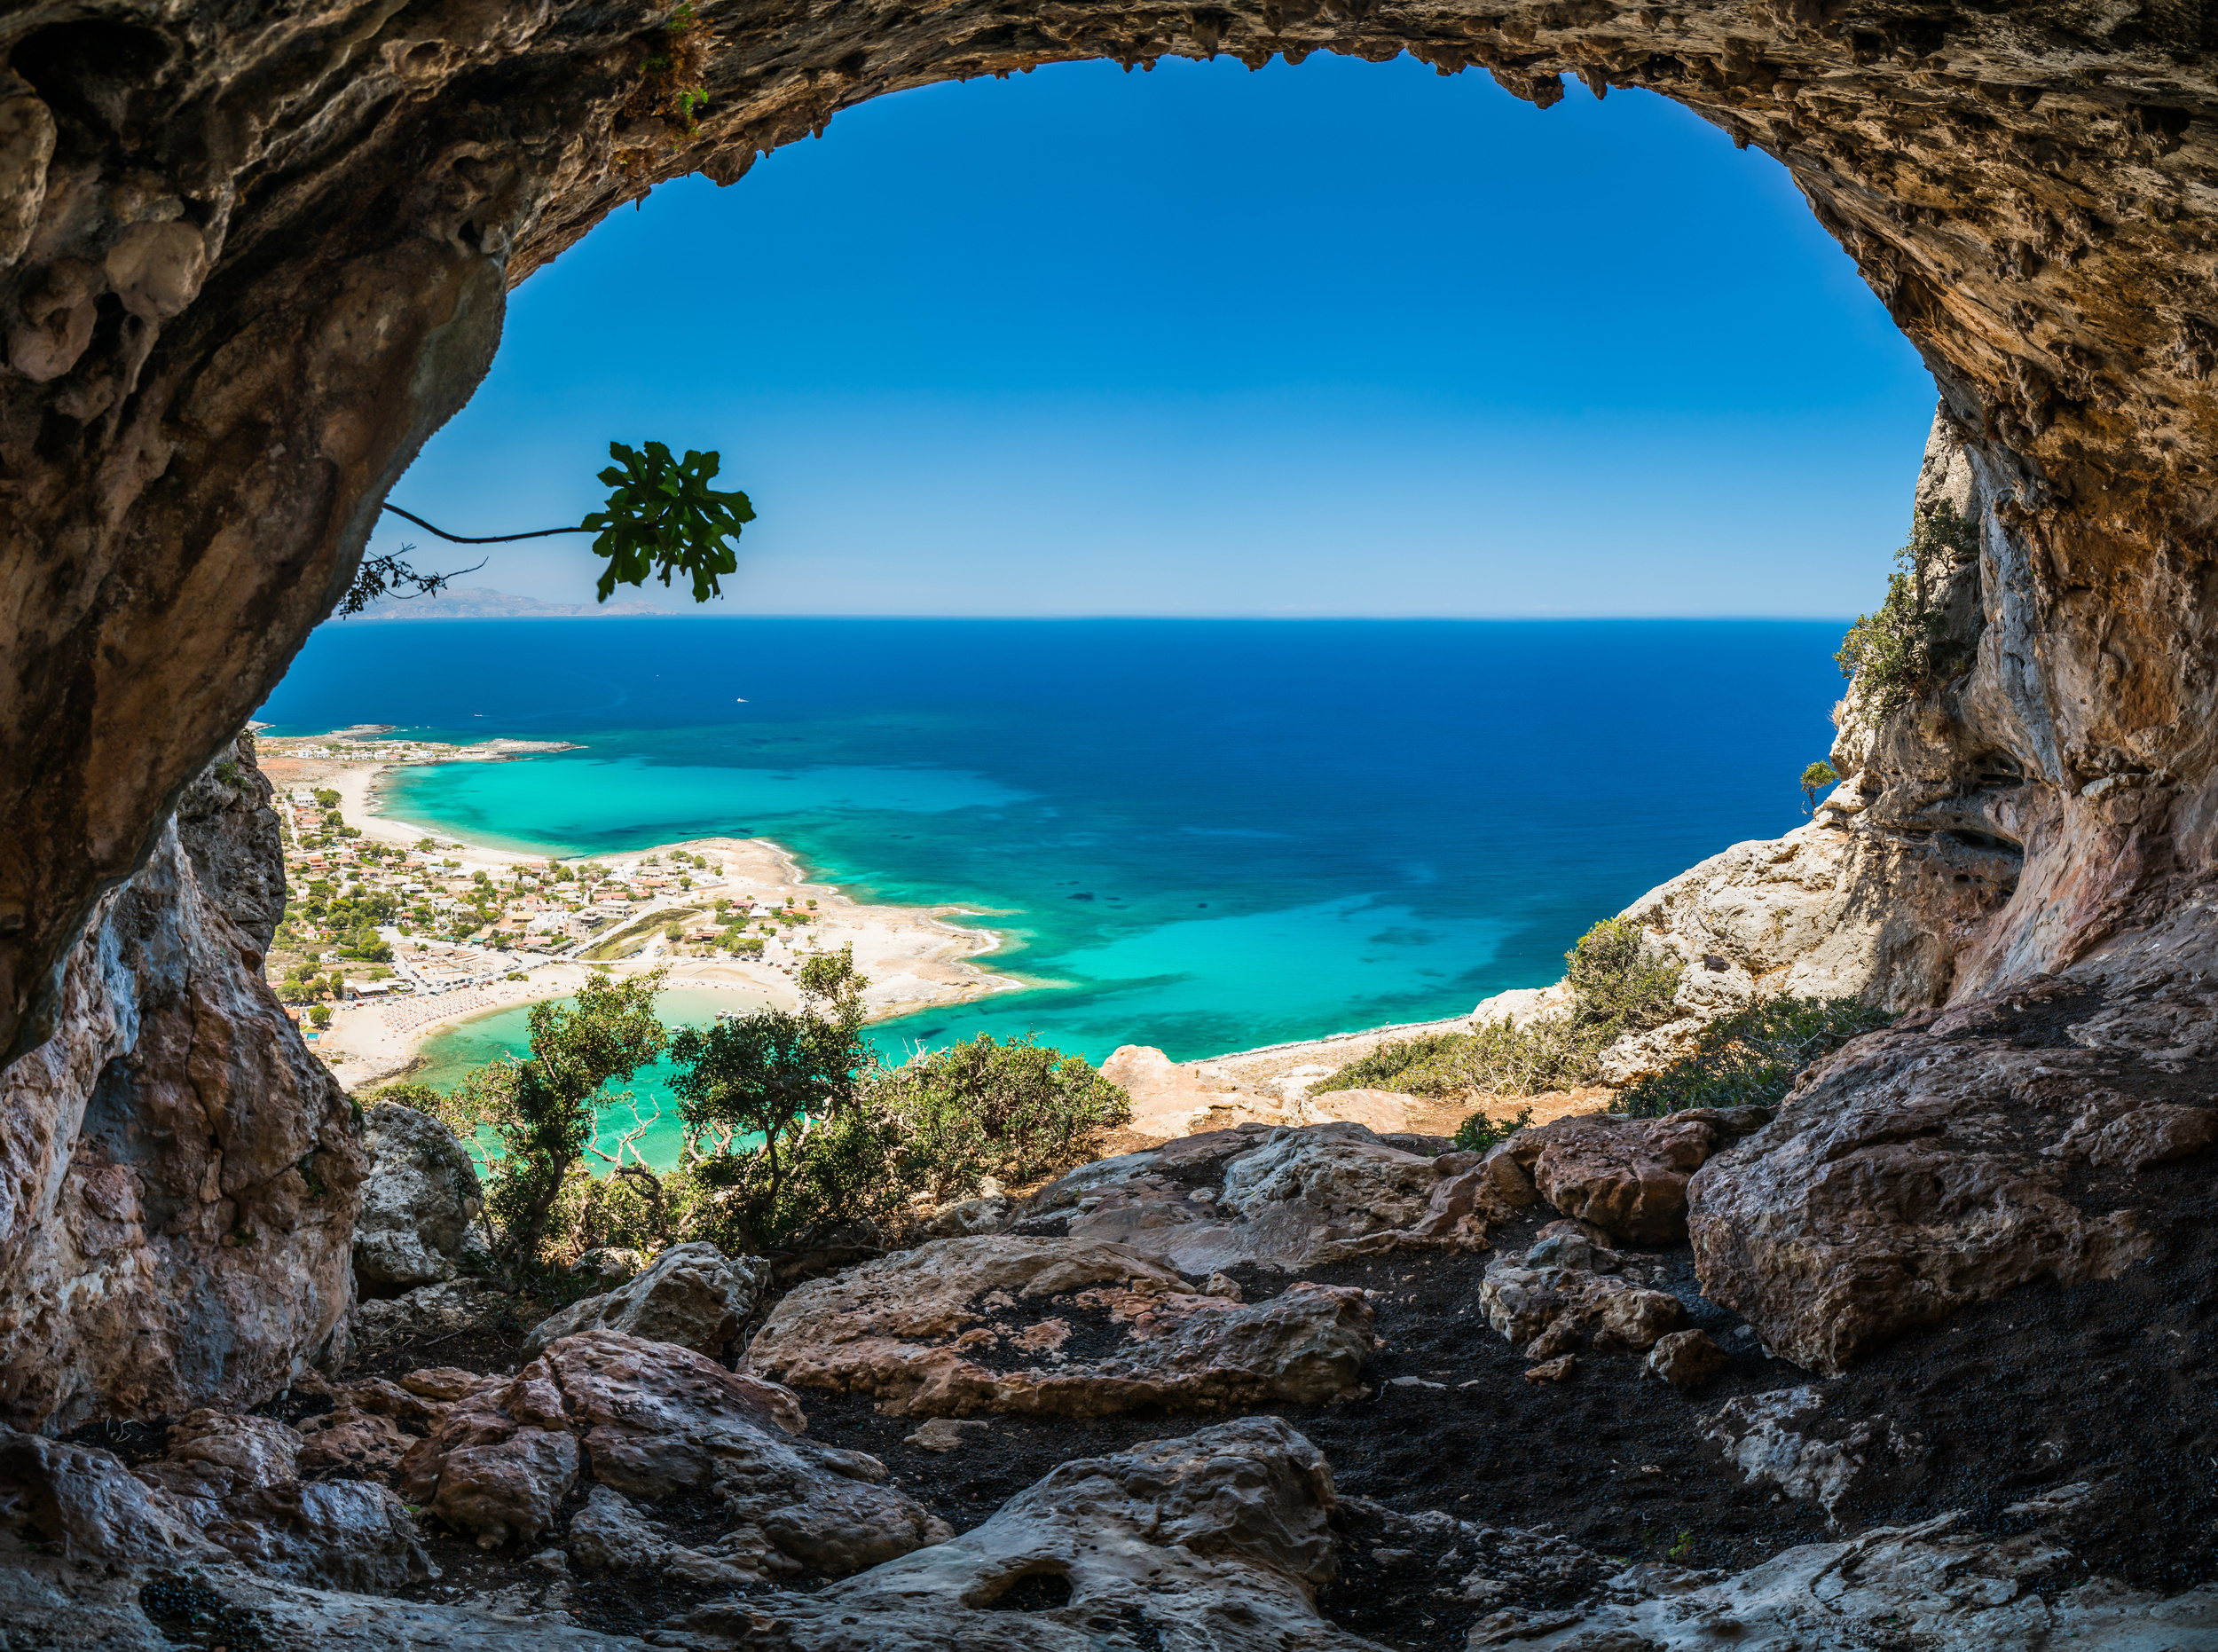 <p>Everyone envisions the ideal Mediterranean getaway as island-hopping in Greece. From the most famous islands like Santorini and Mykonos to lesser-known gems such as Paros, Zakynthos, and Hydra, you’re sure to have a great vacation.</p><p>You may also like: <a href='https://www.yardbarker.com/lifestyle/articles/the_21_best_girl_dinner_ingredients/s1__39607646'>The 21 best "girl dinner" ingredients</a></p>